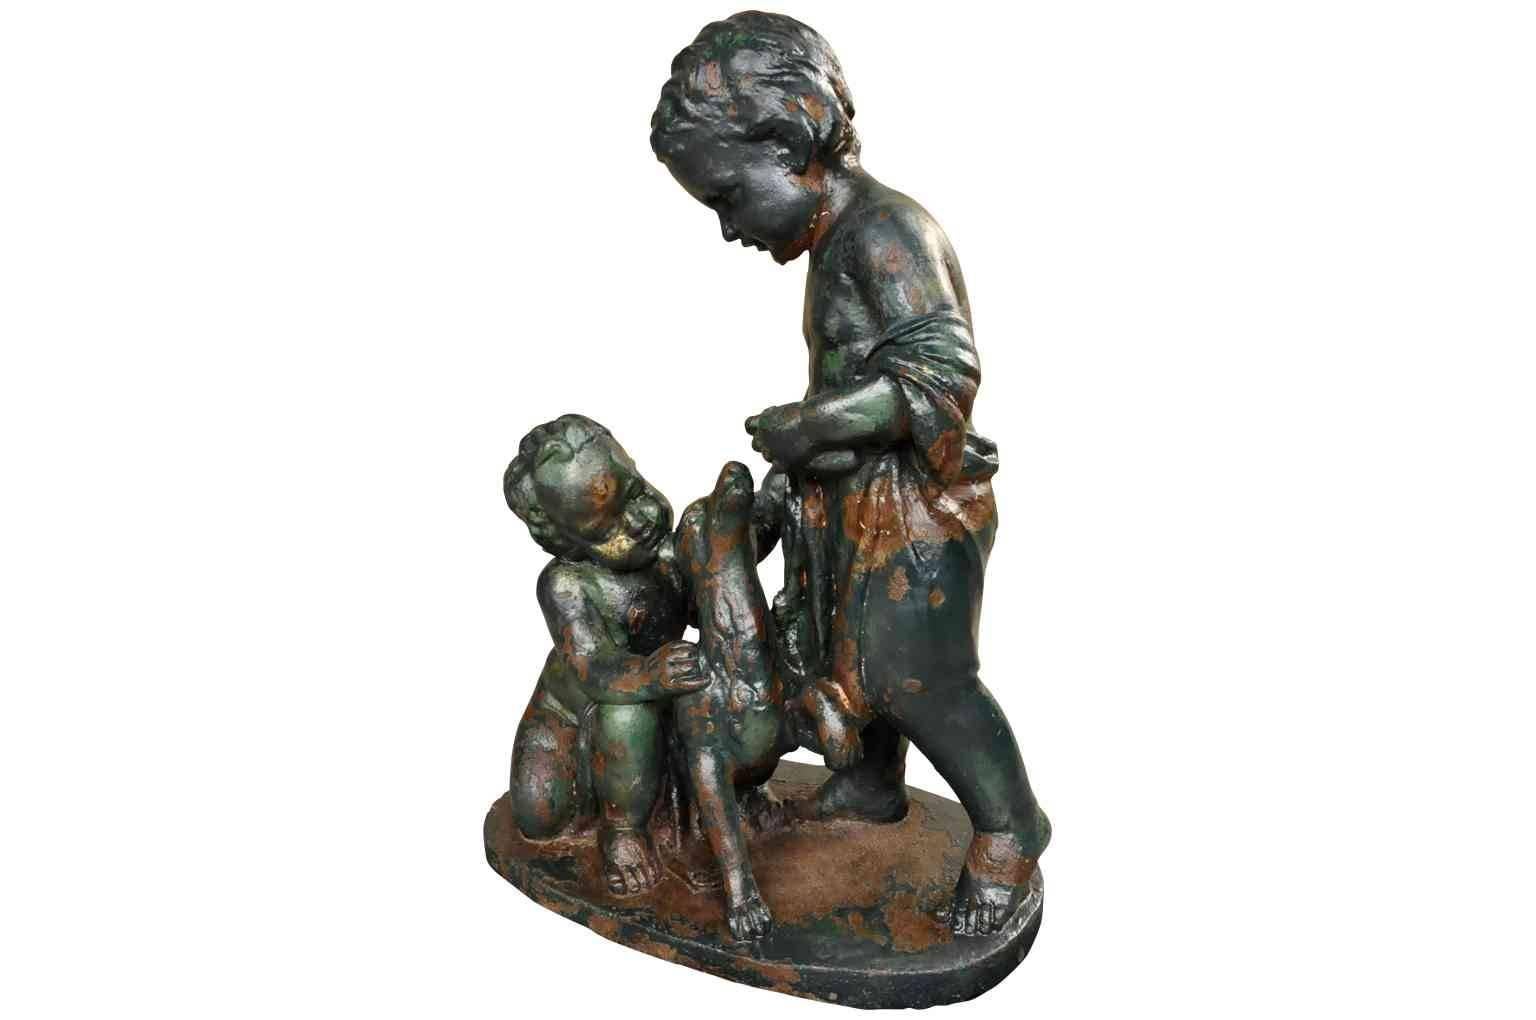 A very charming 19th century French figural statue in painted cast iron. A sweet motif of two children playing with their pet dog. Wonderful as a garden accessory or as an interior decoration.